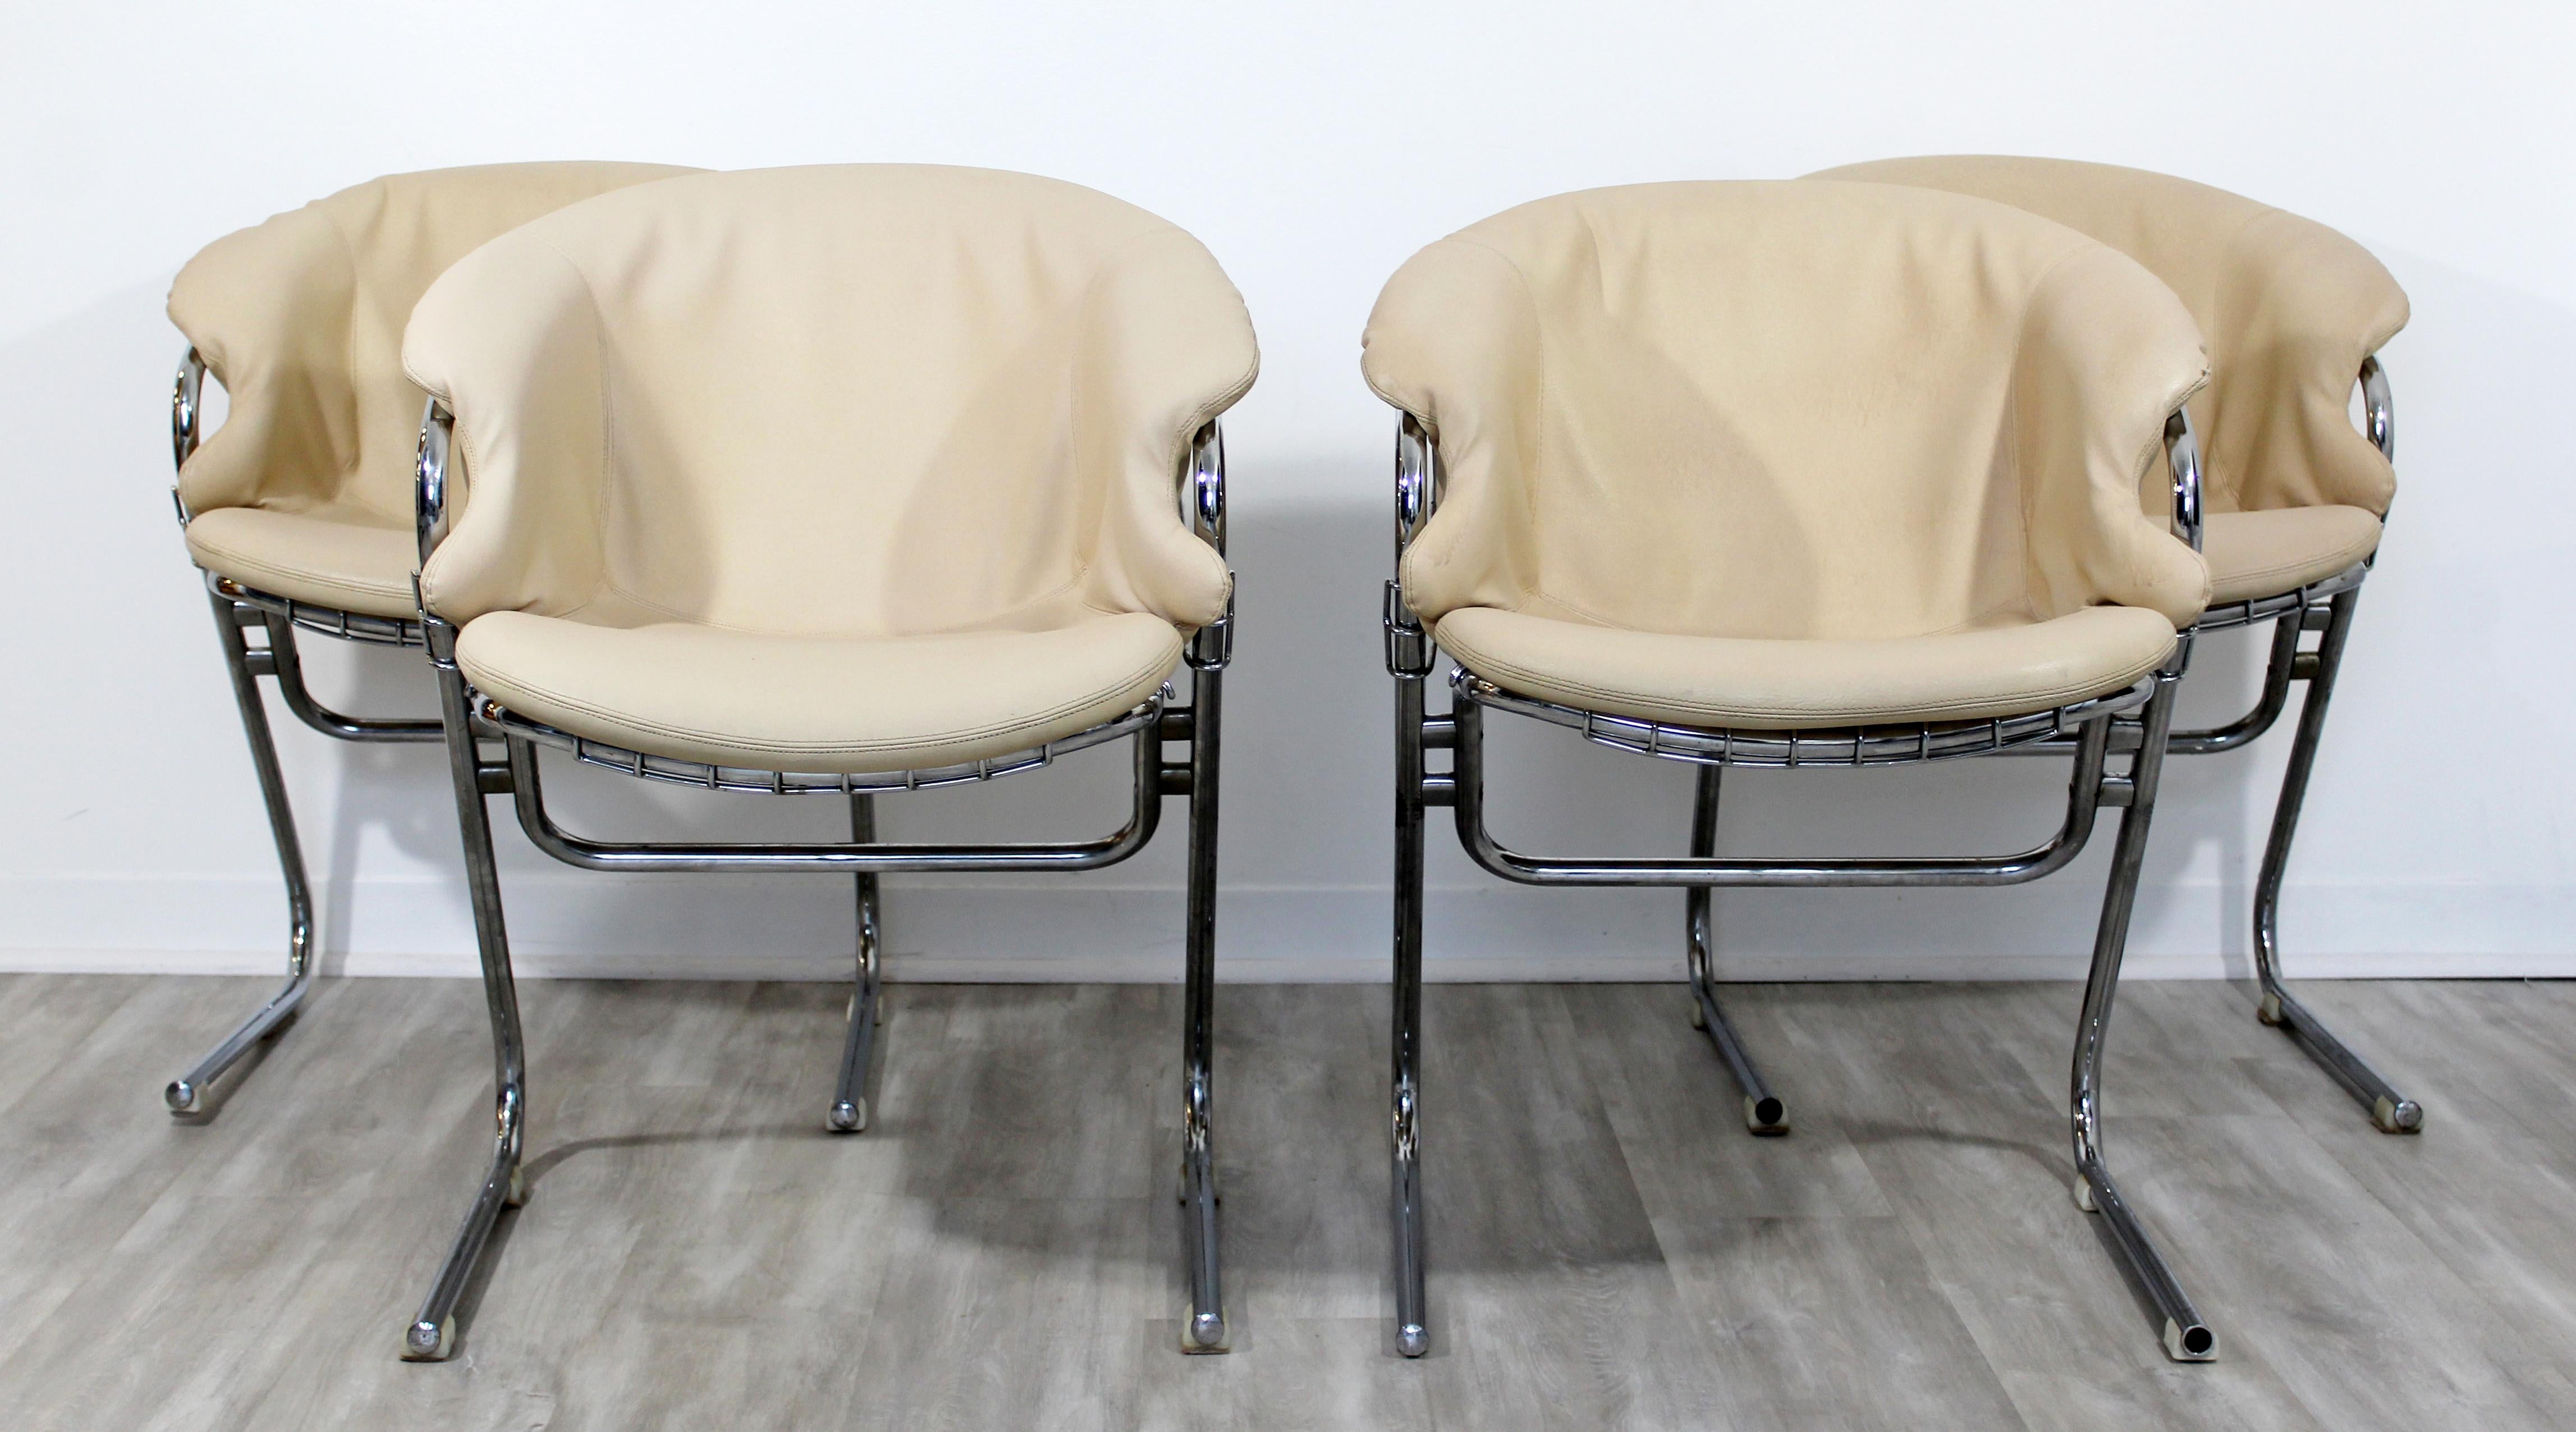 For your consideration is a luxe set of four cantilevered chrome and leather lounge armchairs, by Gastone Rinaldi for Thema, made in Italy, circa 1970s. In very good condition. The dimensions are 23.5